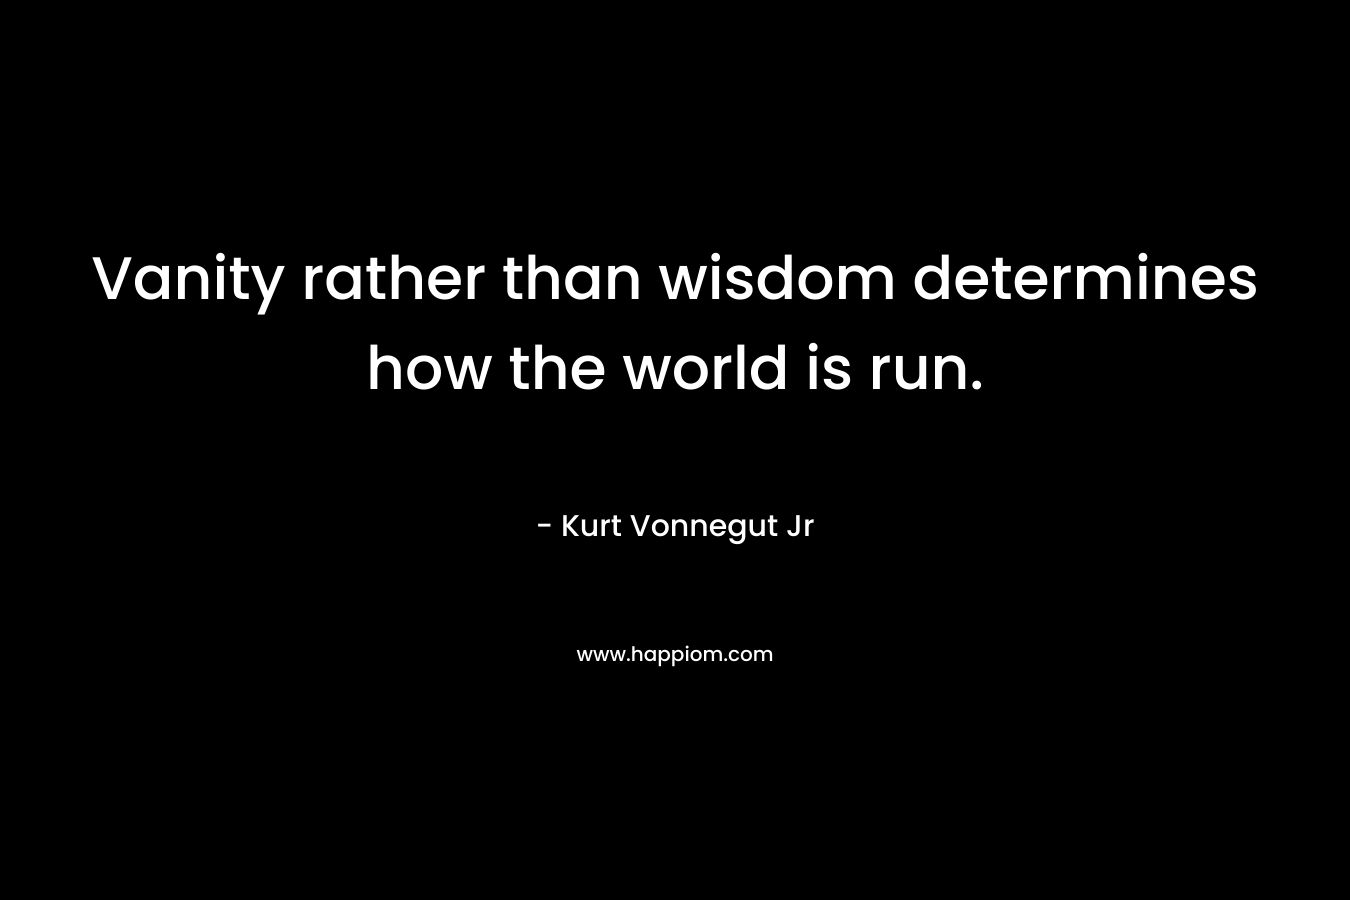 Vanity rather than wisdom determines how the world is run.